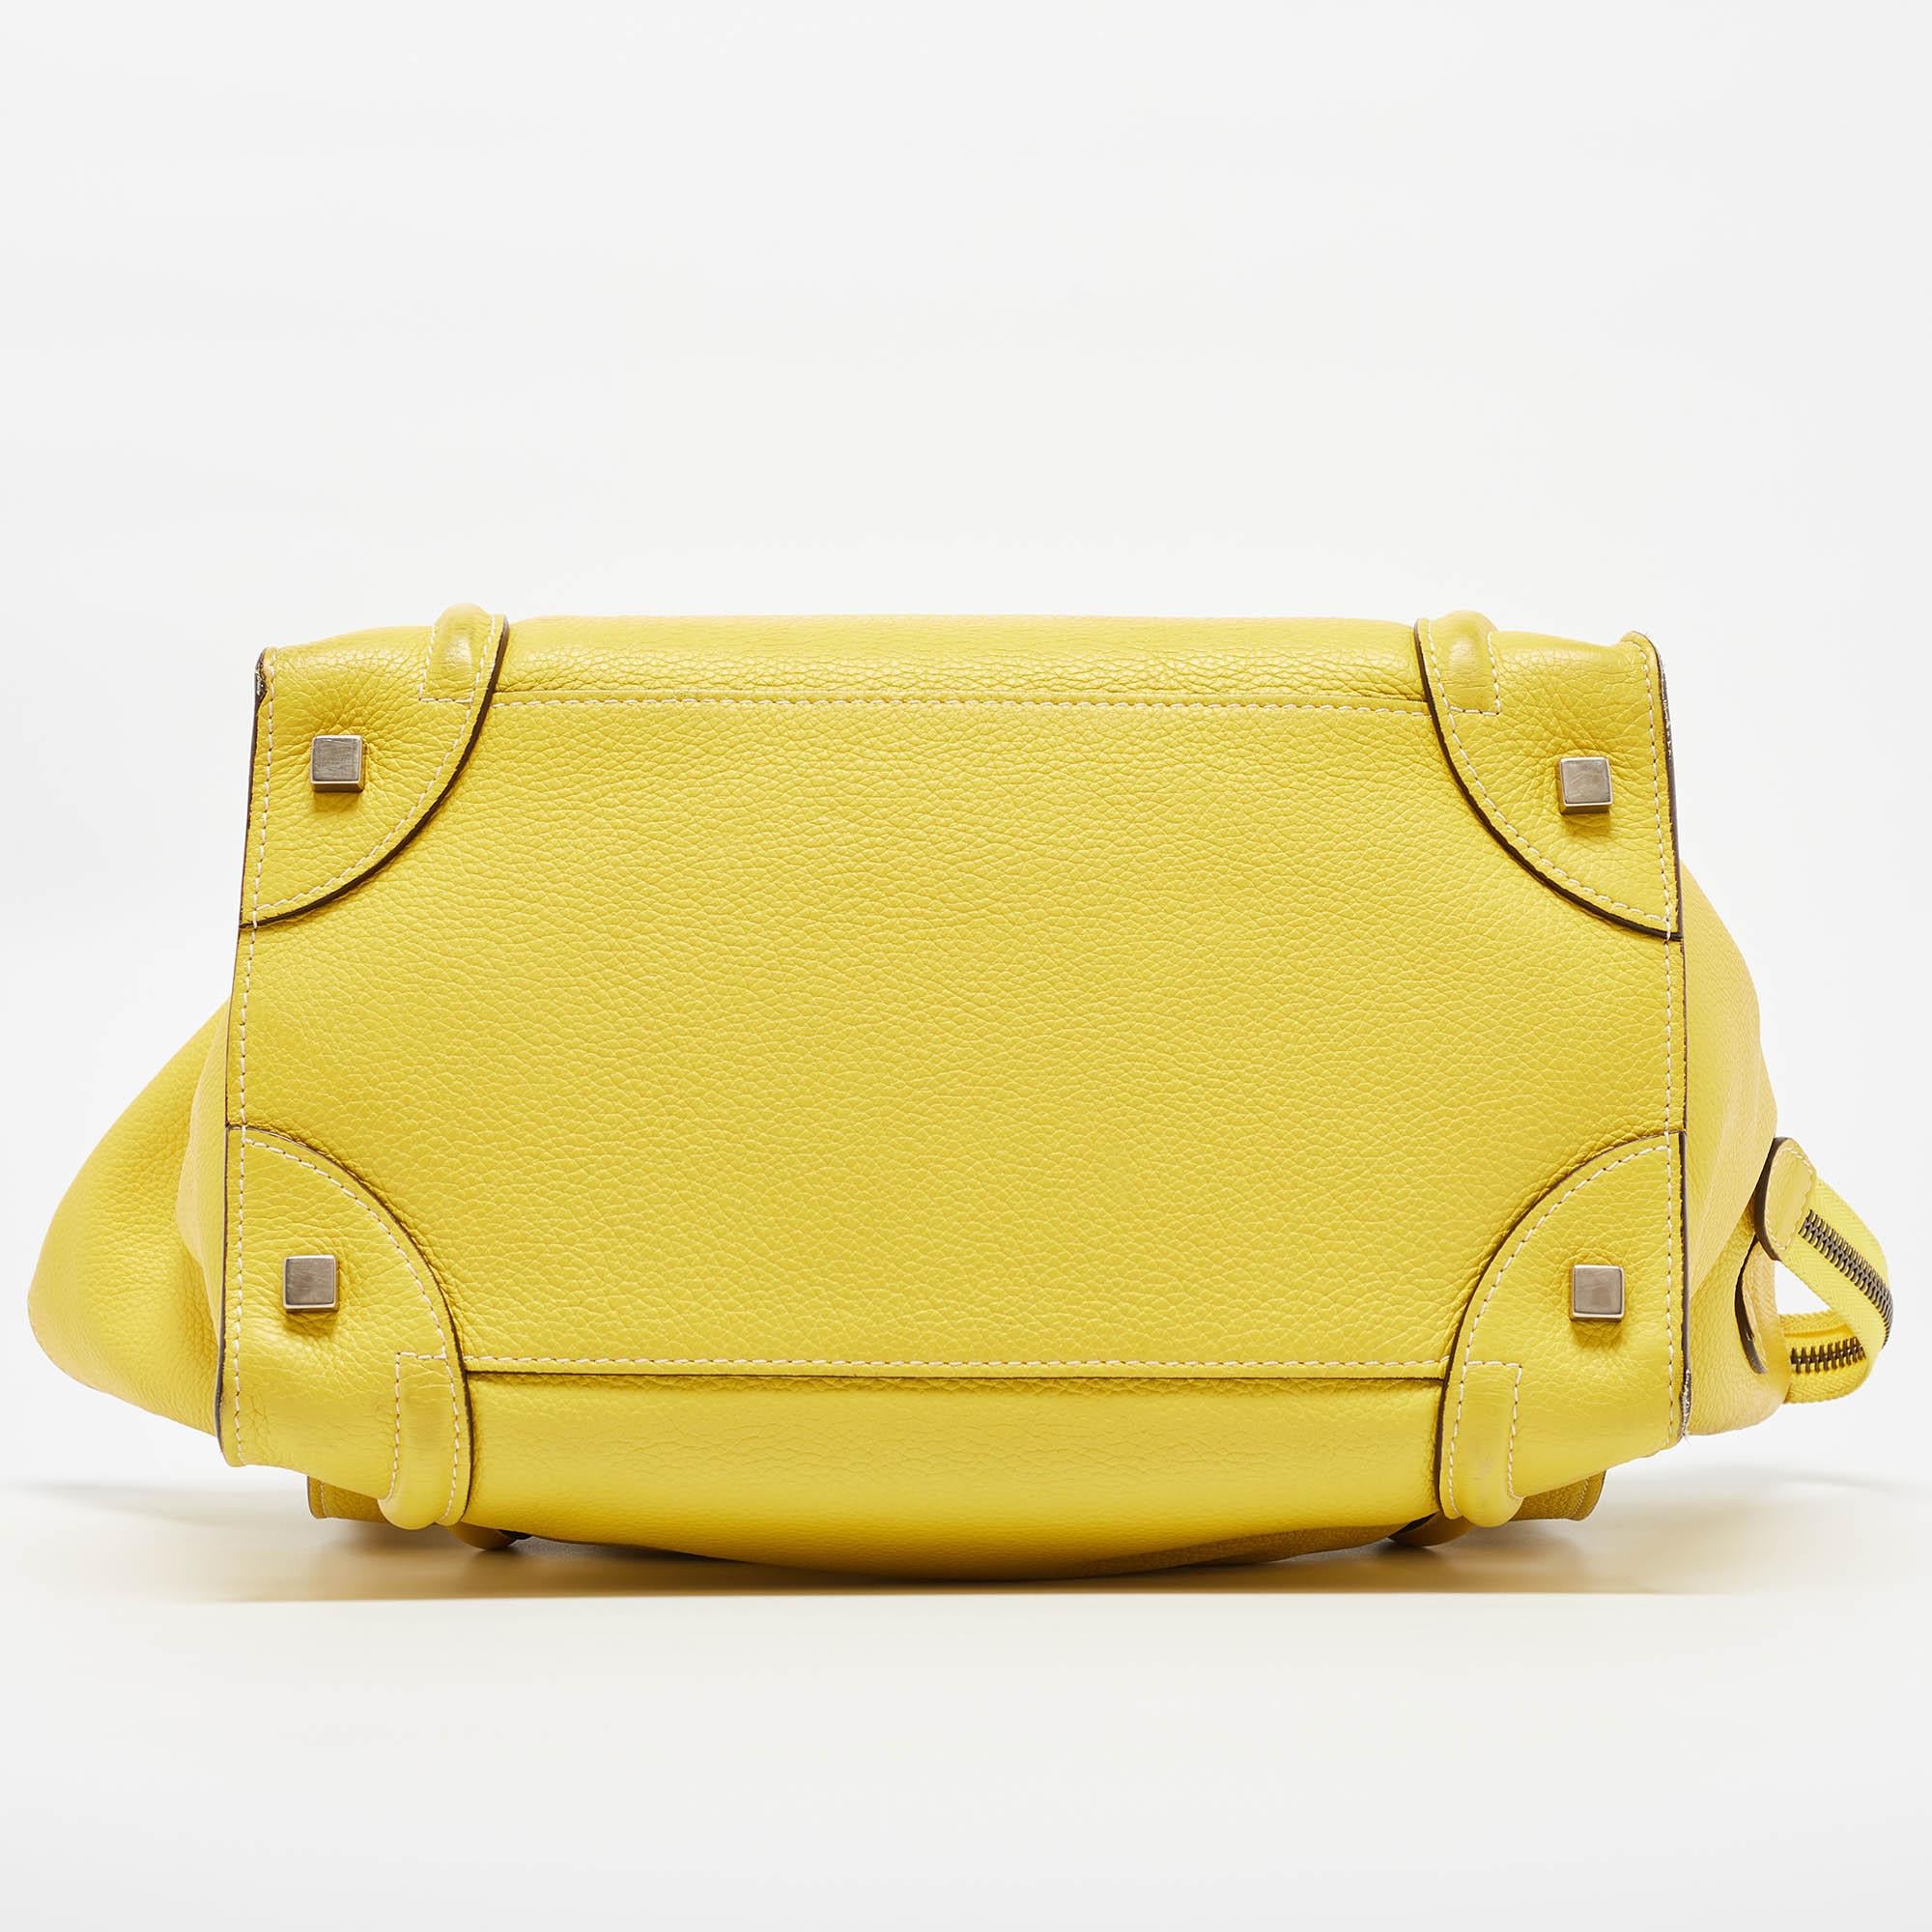 Celine Yellow Leather Mini Luggage Tote For Sale 6